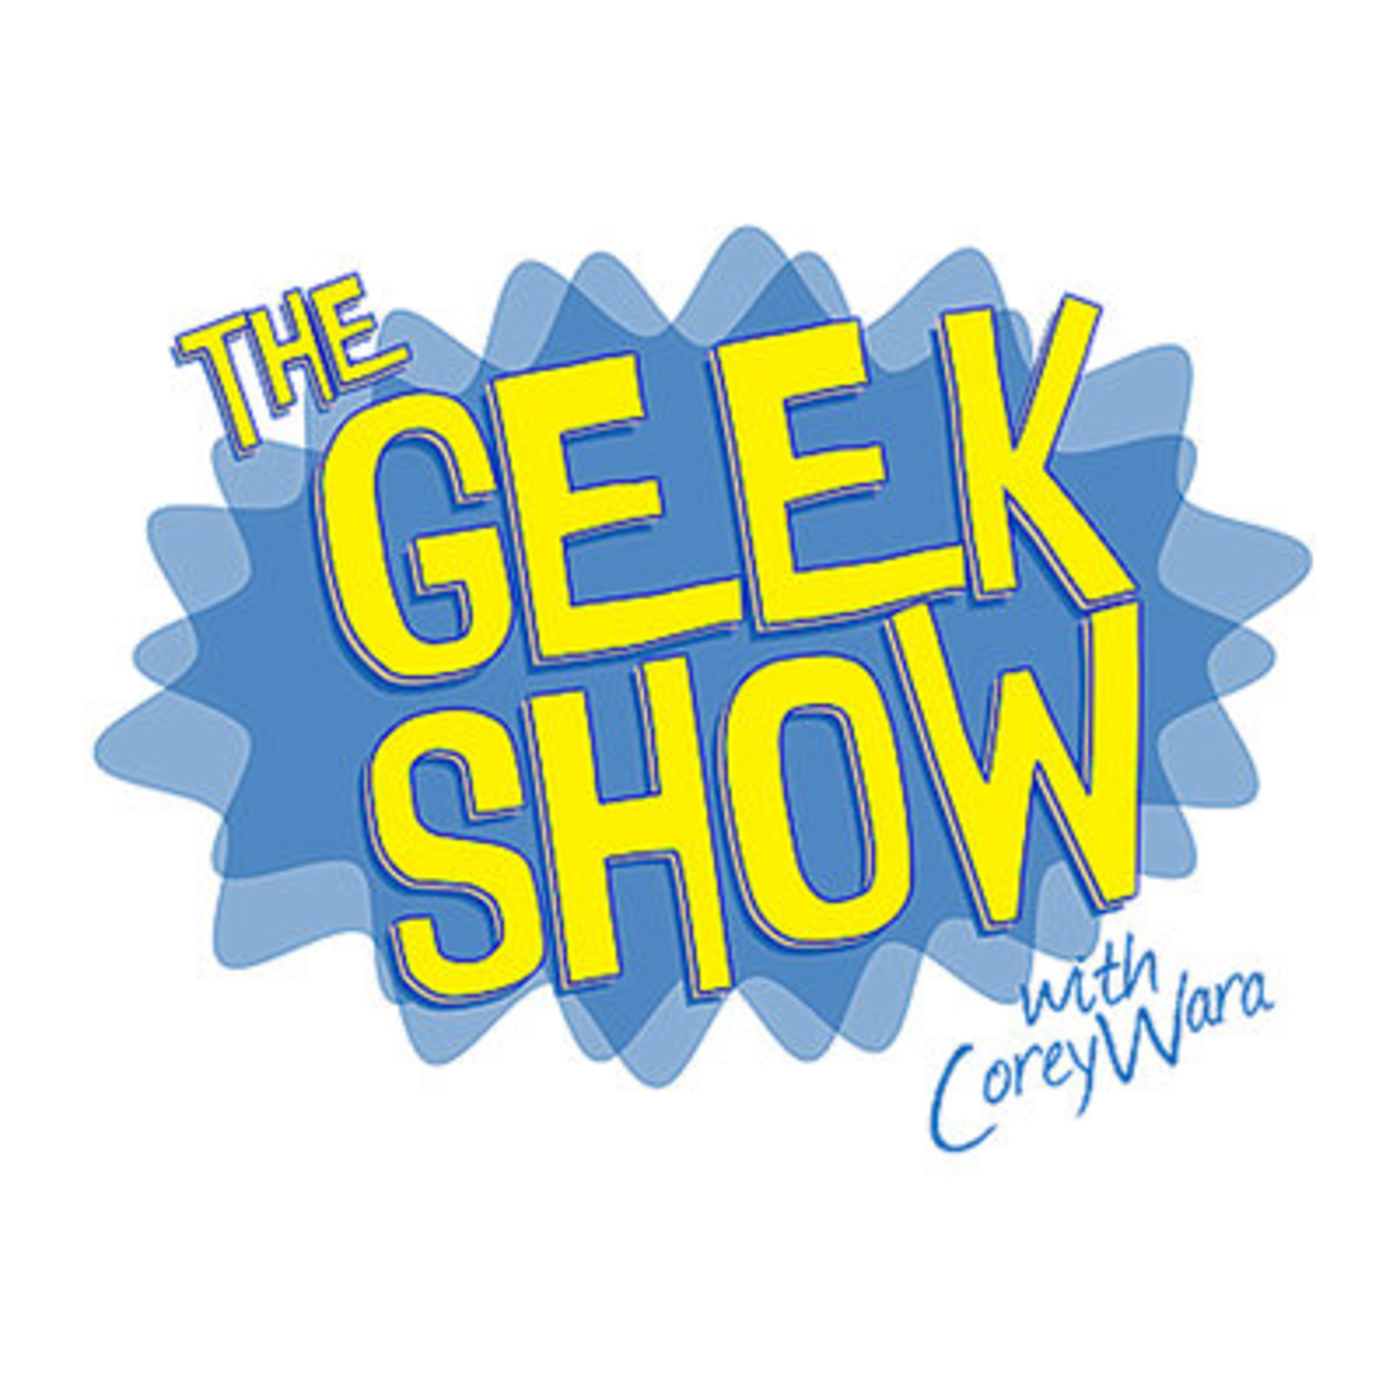 The Last Episode of The Geek Show....for now!